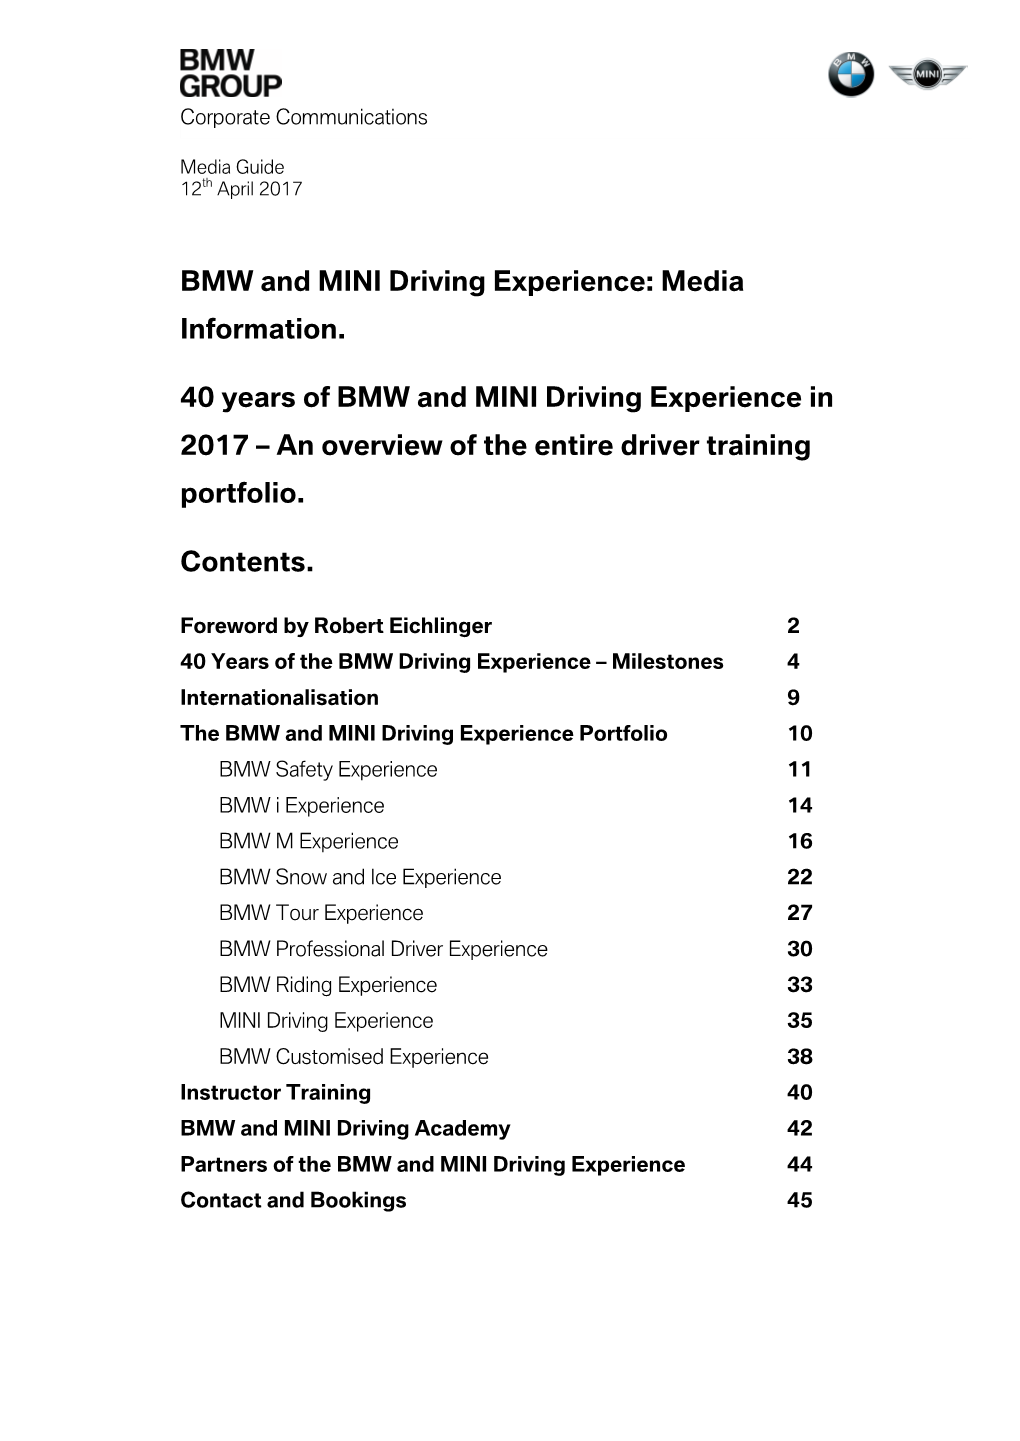 BMW and MINI Driving Experience: Media Information